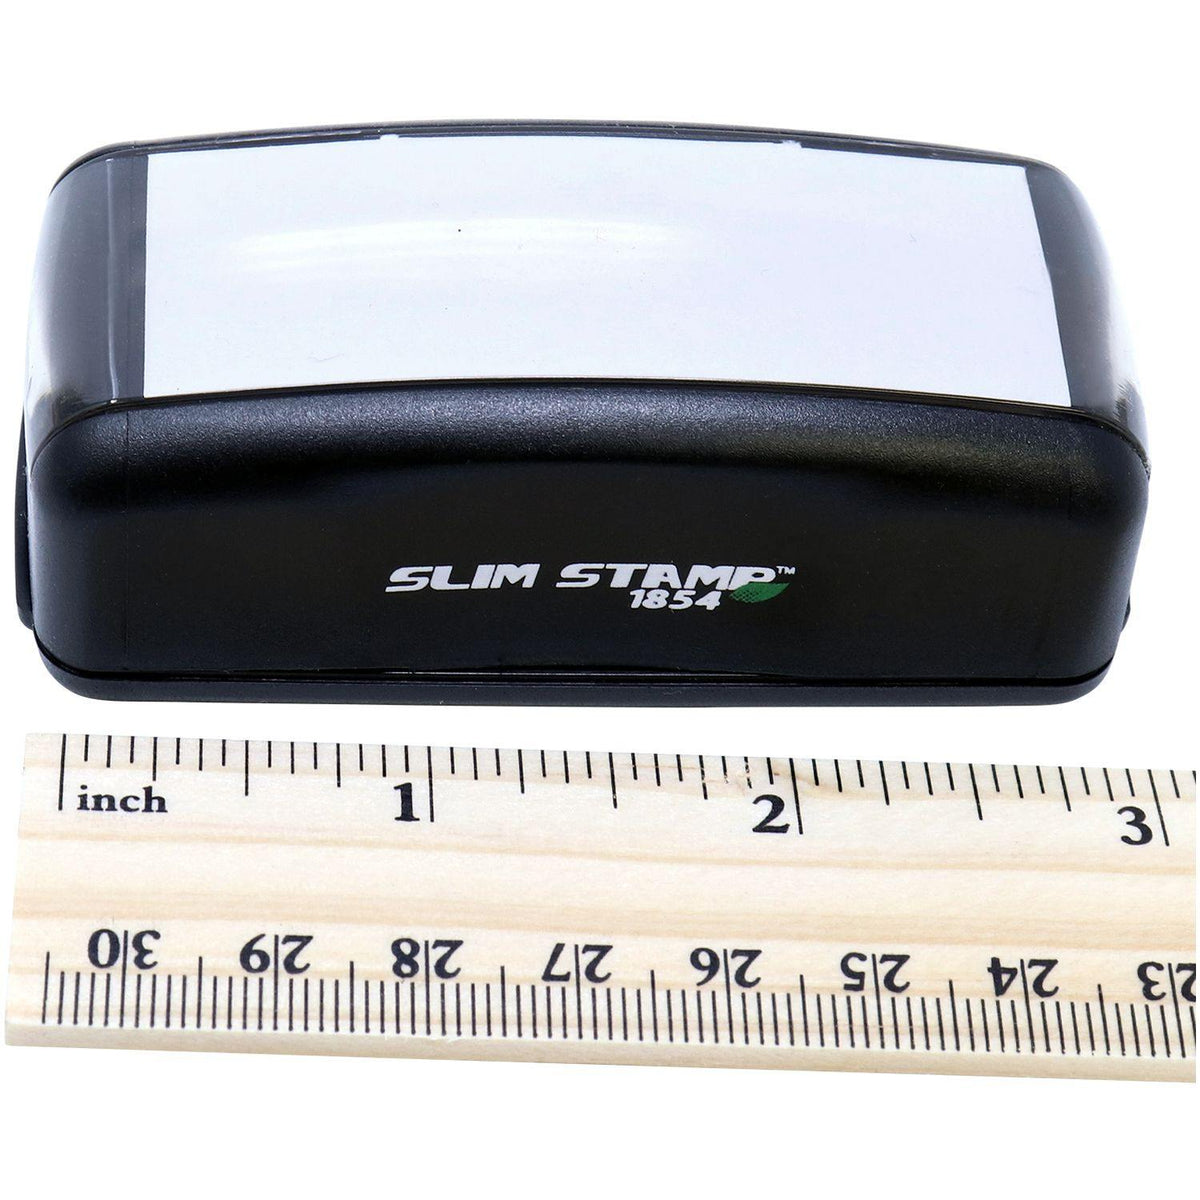 Measurement Large Pre Inked Capitation Stamp with Ruler